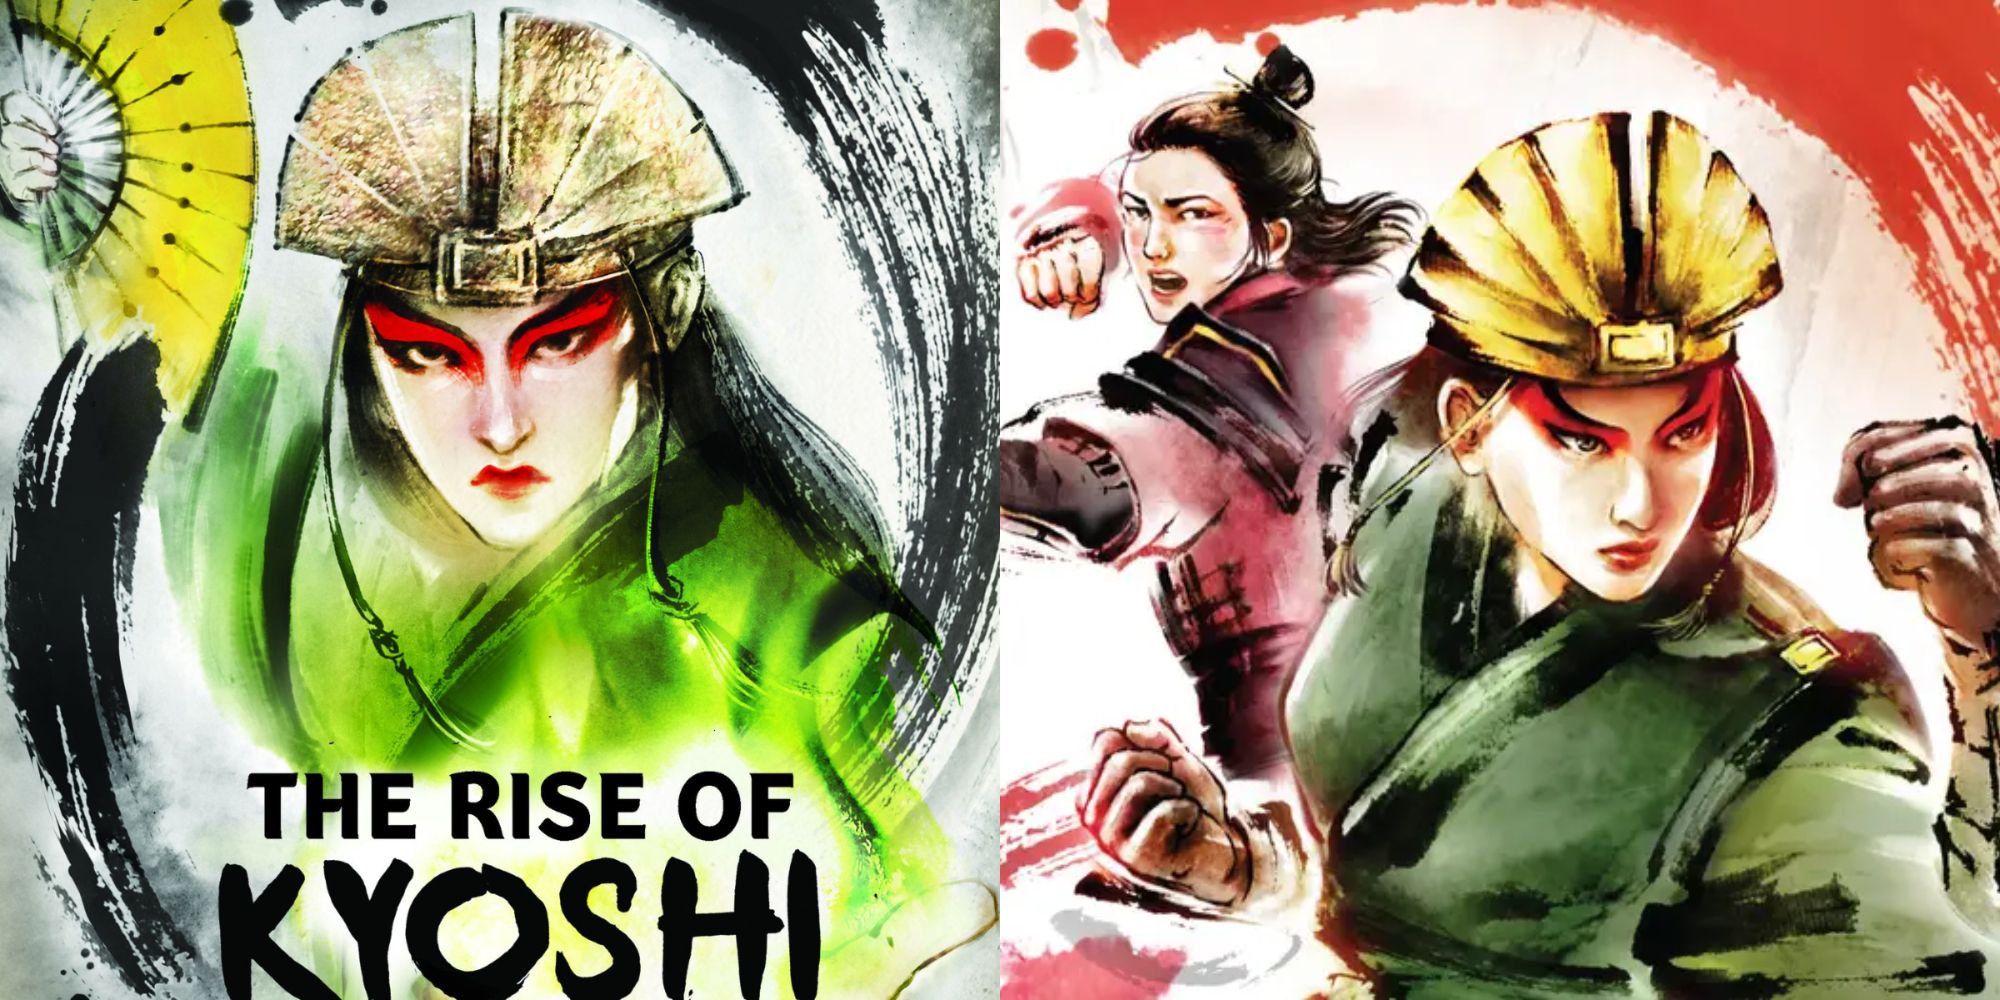 Split image showing the covers for The Rise of Kyoshi and The Shadow of Kyoshi.